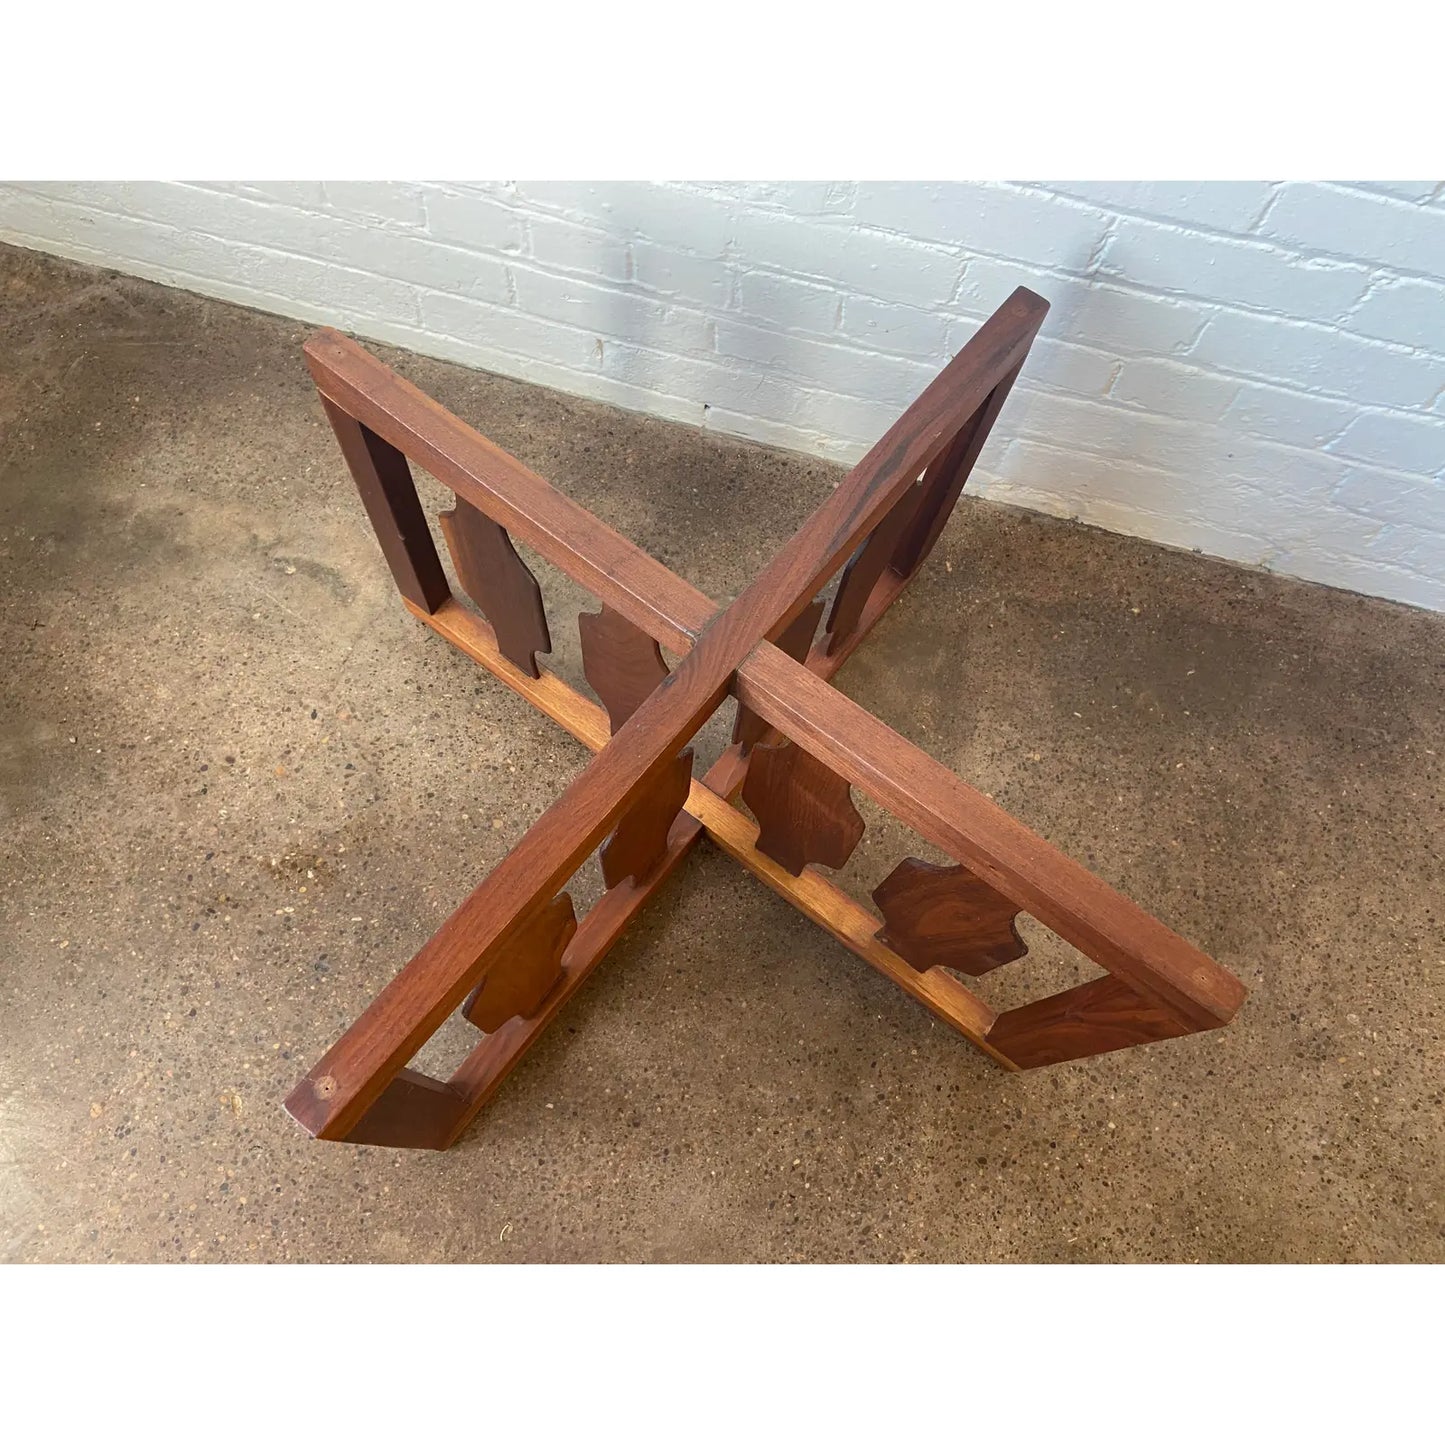 VINTAGE ADRIAN PEARSALL WALNUT SCULPTURAL COFFEE TABLE